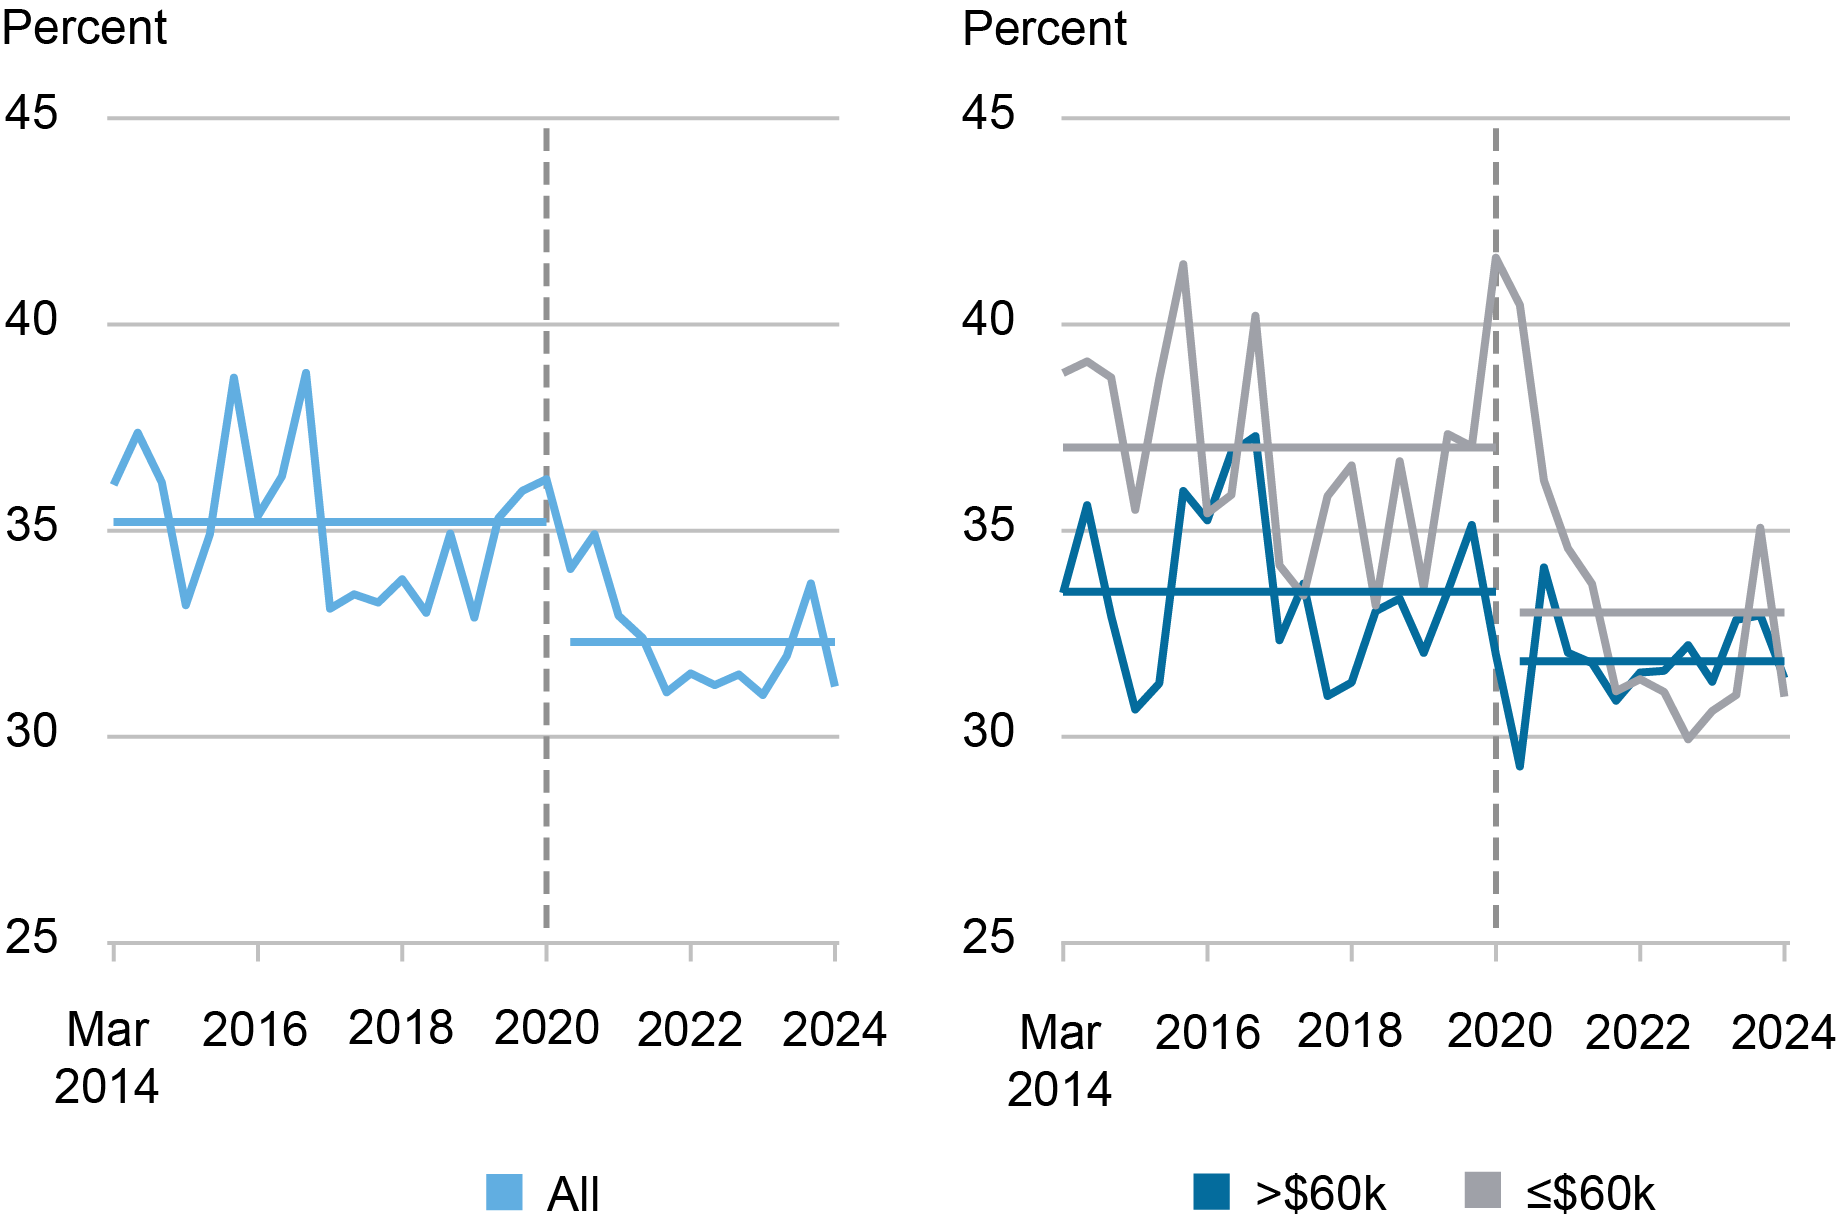 Two-panel figure, with a line chart on the left showing declines in expectations of working full-time past 67 for all respondents (light blue) and a line chart on the right showing the same for those with incomes above (dark blue) or below (gray) $60,000, from March 2014 to March 2024. 